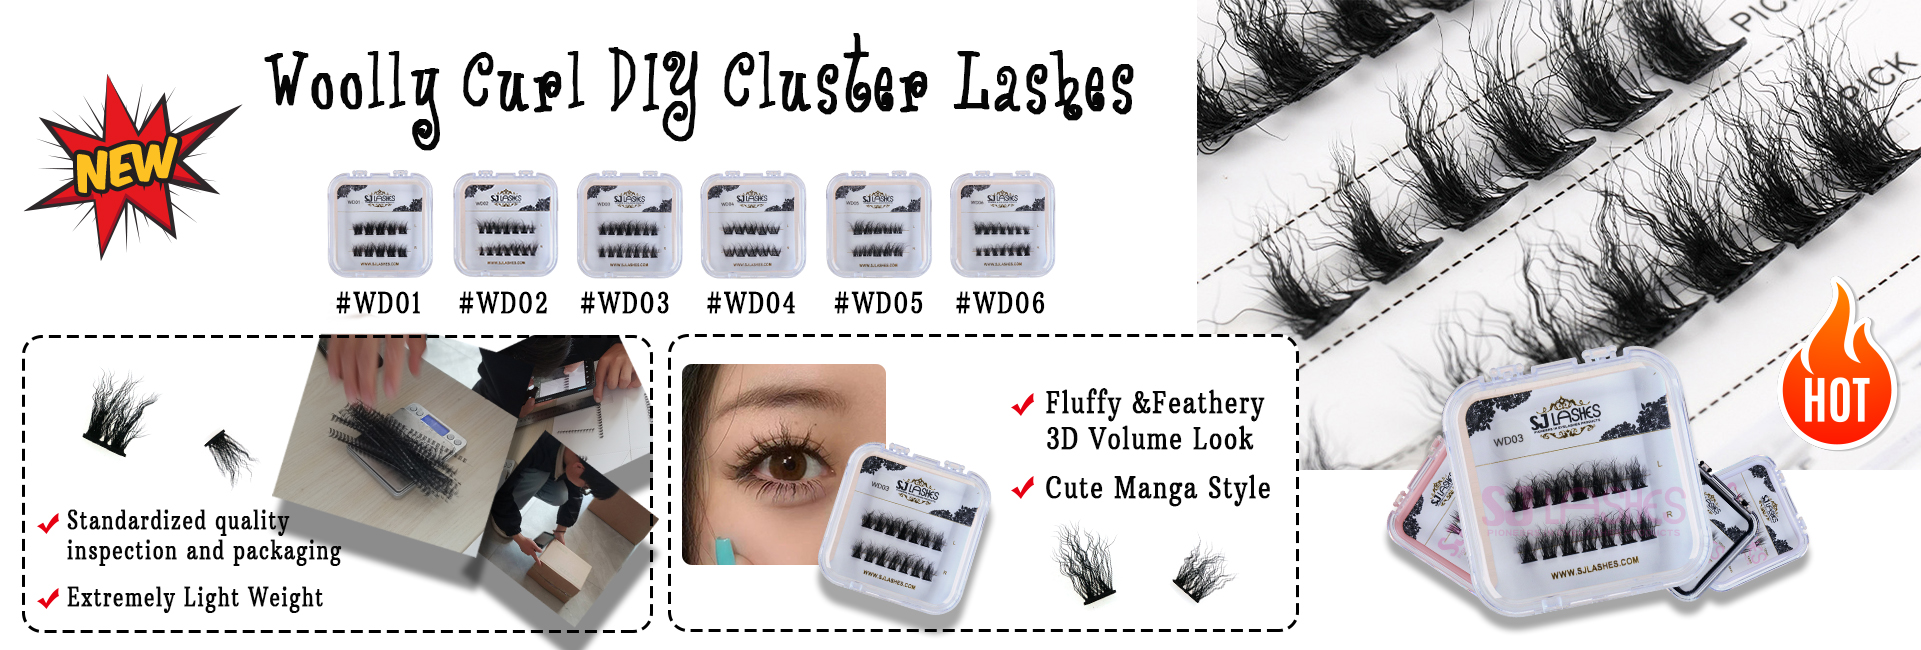 Woolly Curl DIY Cluster Lashes